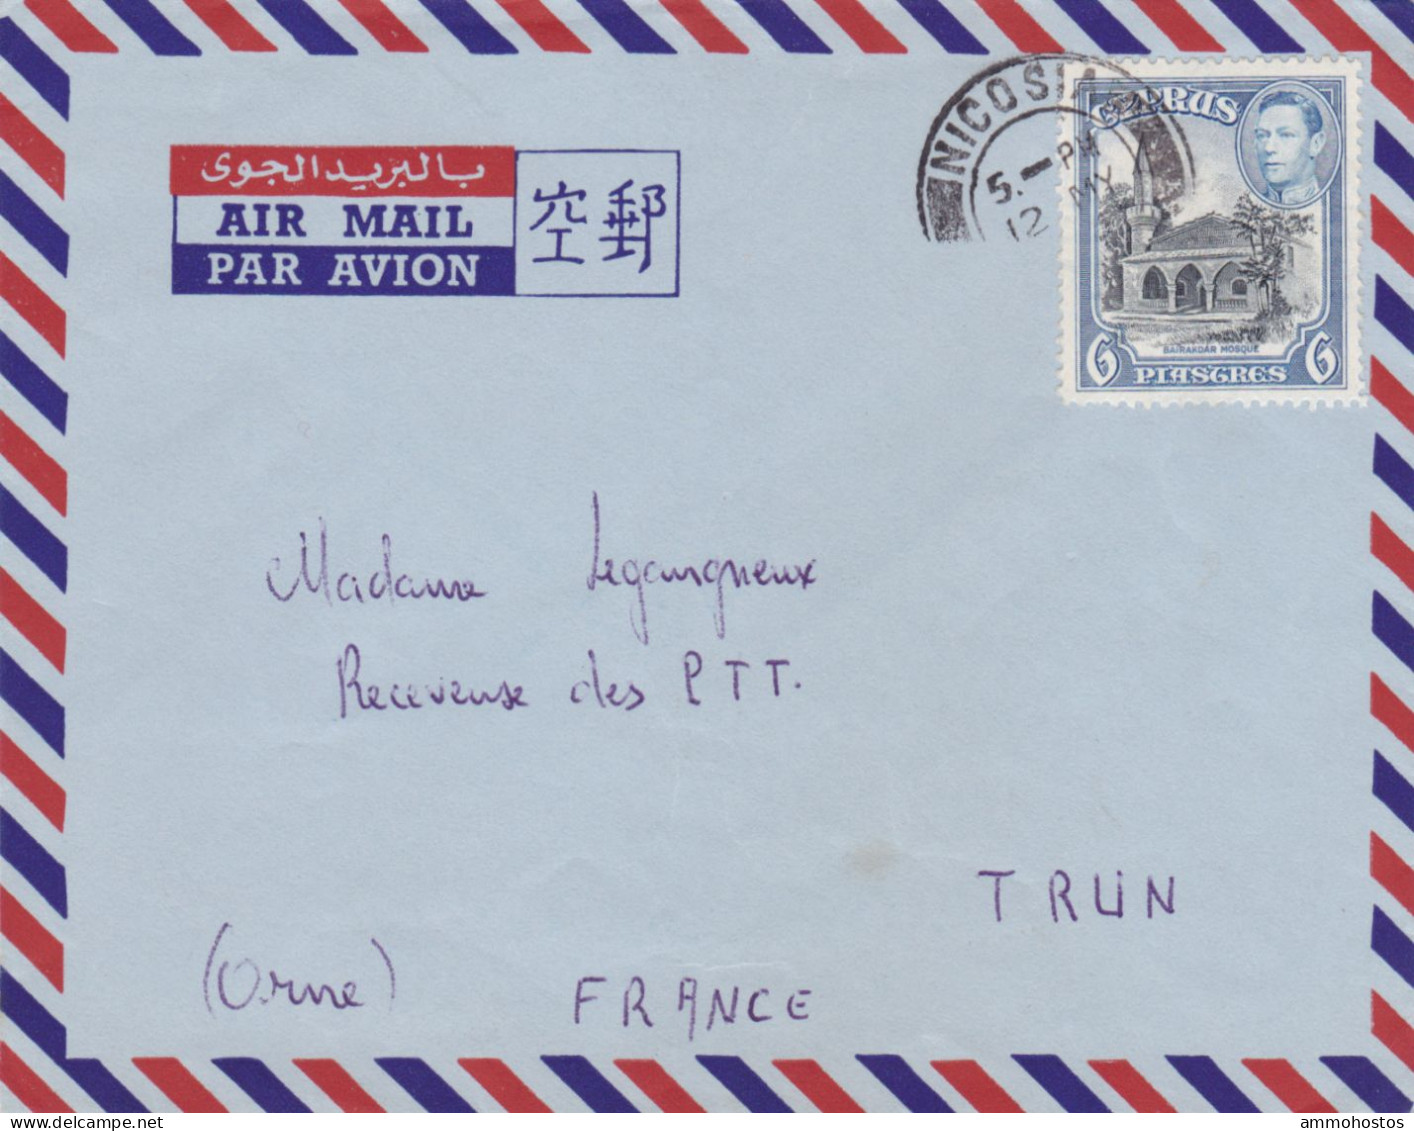 CYPRUS KGVI AIRMAIL COVER NICOSIA FRANCE 6 PIASTRE RATE - Cyprus (...-1960)